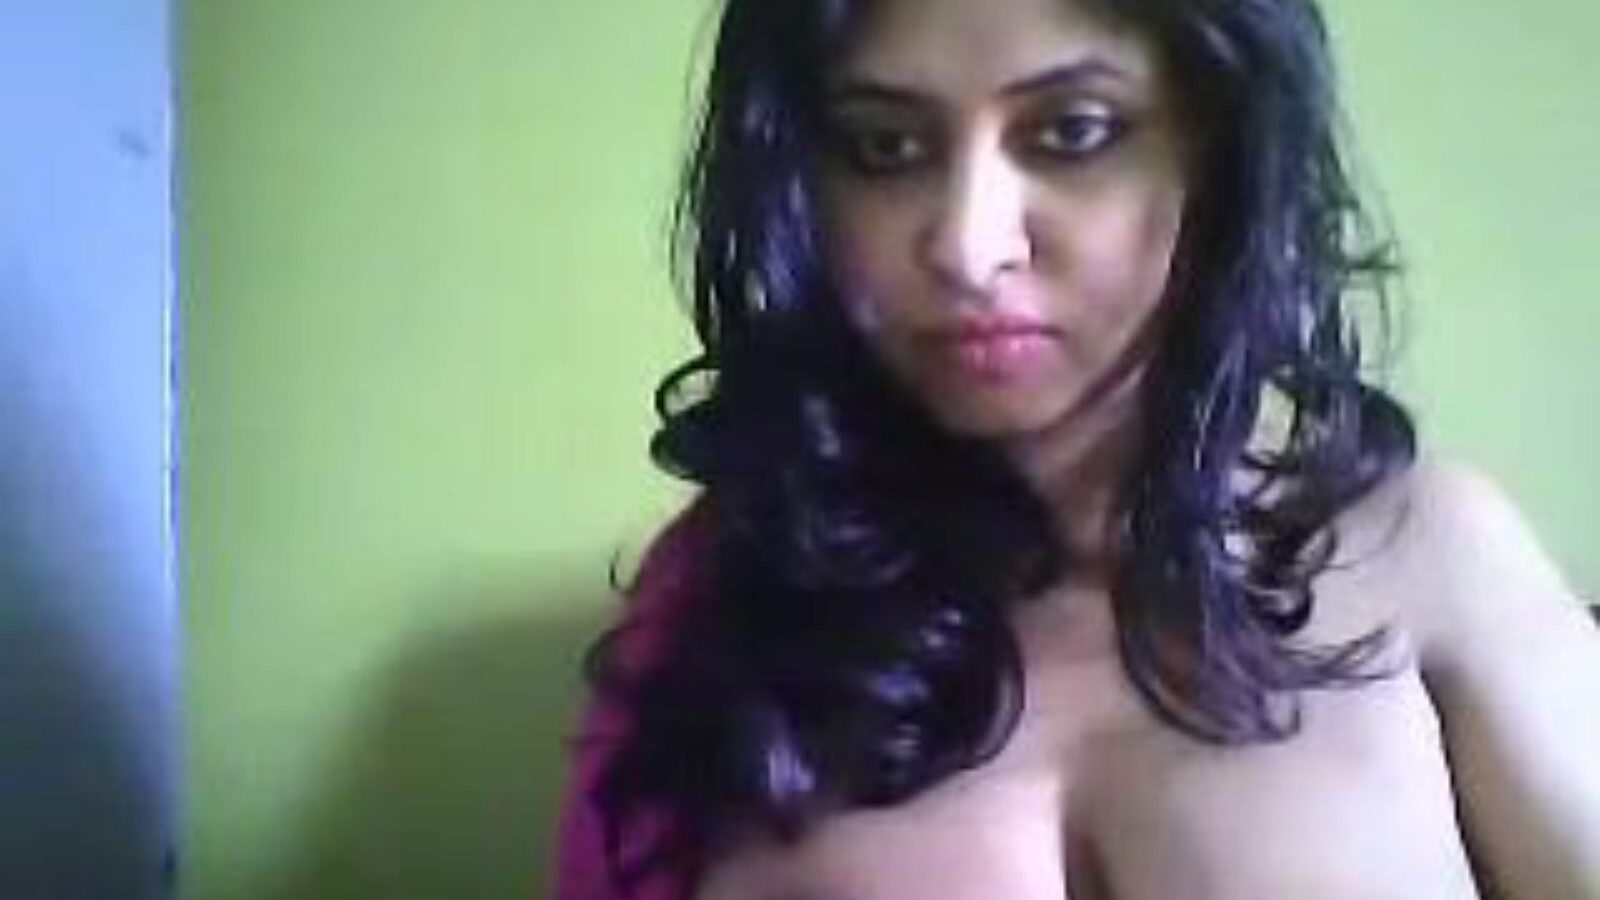 Desi Hot Cam MILF Deepa, Free Indian Porn 27: xHamster Watch Desi Hot Cam MILF Deepa movie scene on xHamster, the giant romp tube web site with tons of free-for-all Asian Indian & Xxx Hot porn episodes